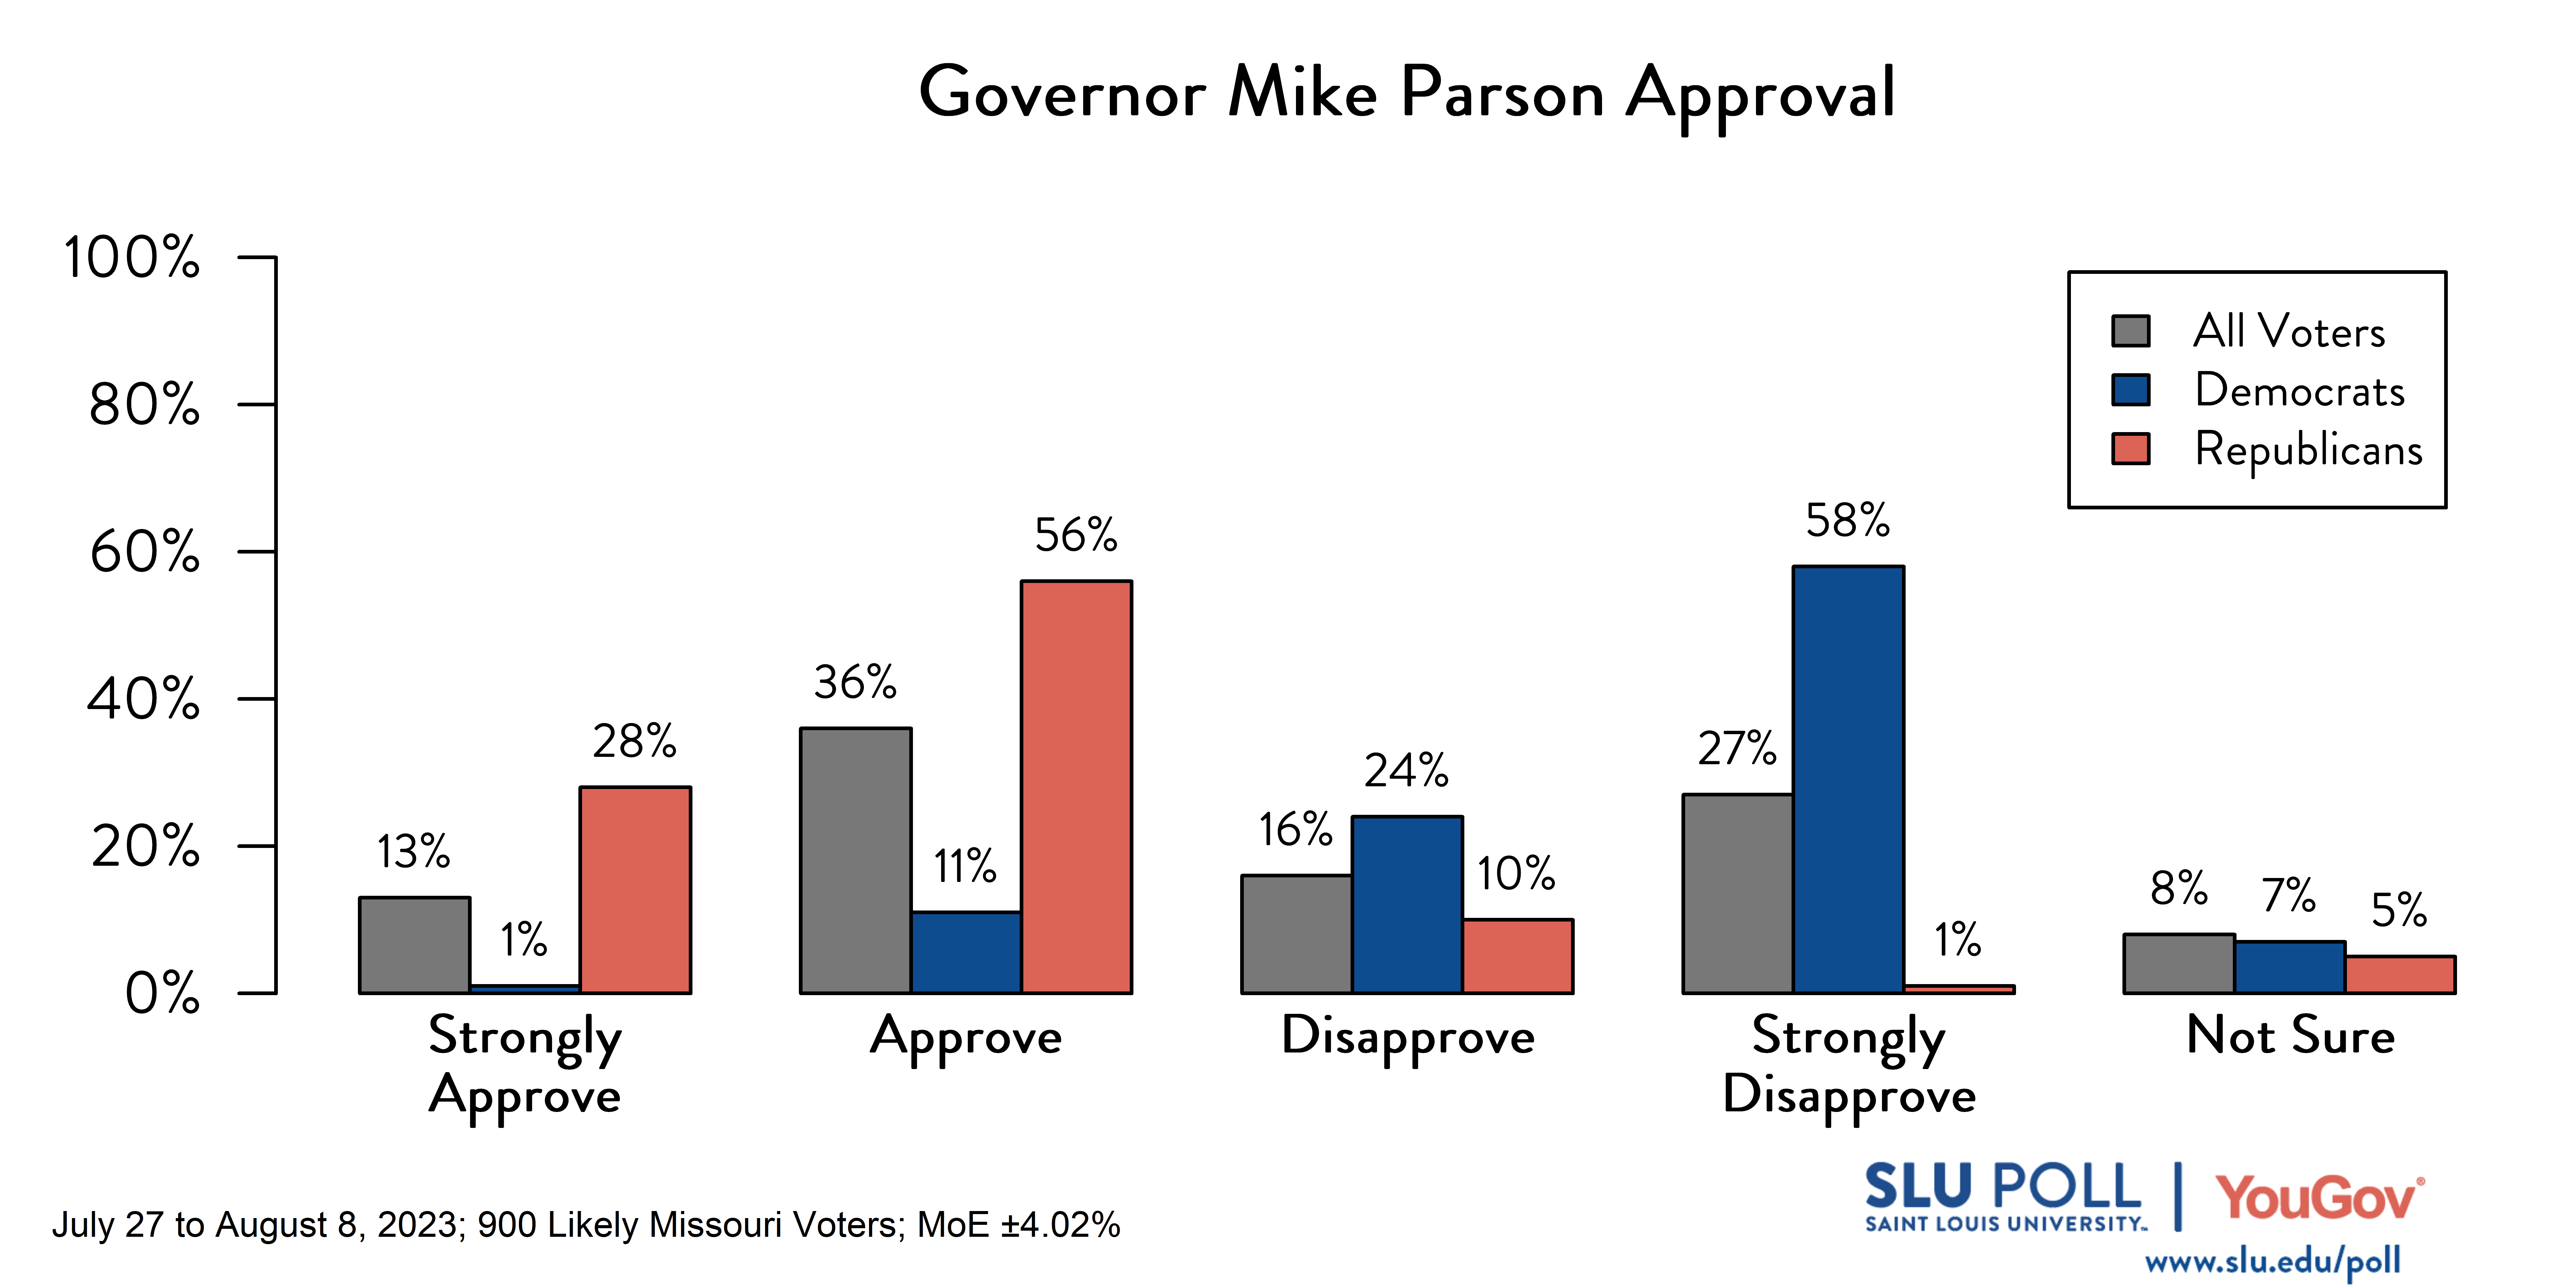 Likely voters' responses to 'Do you approve or disapprove of the way each is doing their job: Governor Mike Parson?': 13% Strongly approve, 36% Approve, 16% Disapprove, 27% Strongly disapprove, and 8% Not sure. Democratic voters' responses: ' 1% Strongly approve, 11% Approve, 24% Disapprove, 58% Strongly disapprove, and 7% Not sure. Republican voters' responses: 28% Strongly approve, 56% Approve, 10% Disapprove, 1% Strongly disapprove, and 5% Not sure.